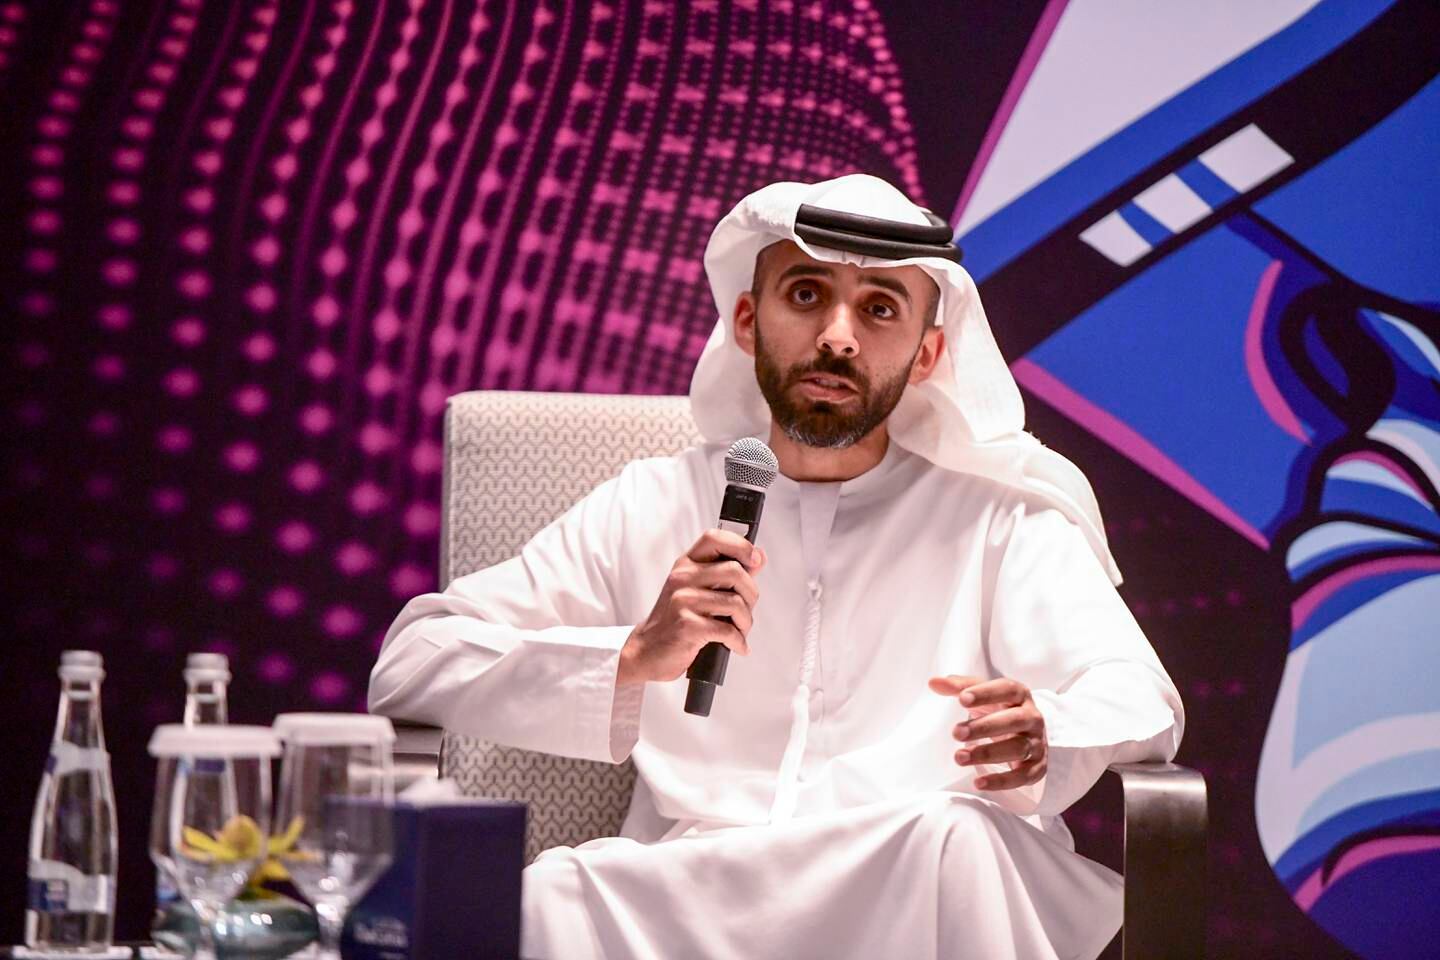 As part of the Access Abu Dhabi initiative, the Adio will help expose businesses to the emirate’s enabling ecosystem, find them a location and source funding equity, Abdulla Al Shamsi, acting director general of the Abu Dhabi Investment Office said. Khushnum Bhandari/The National